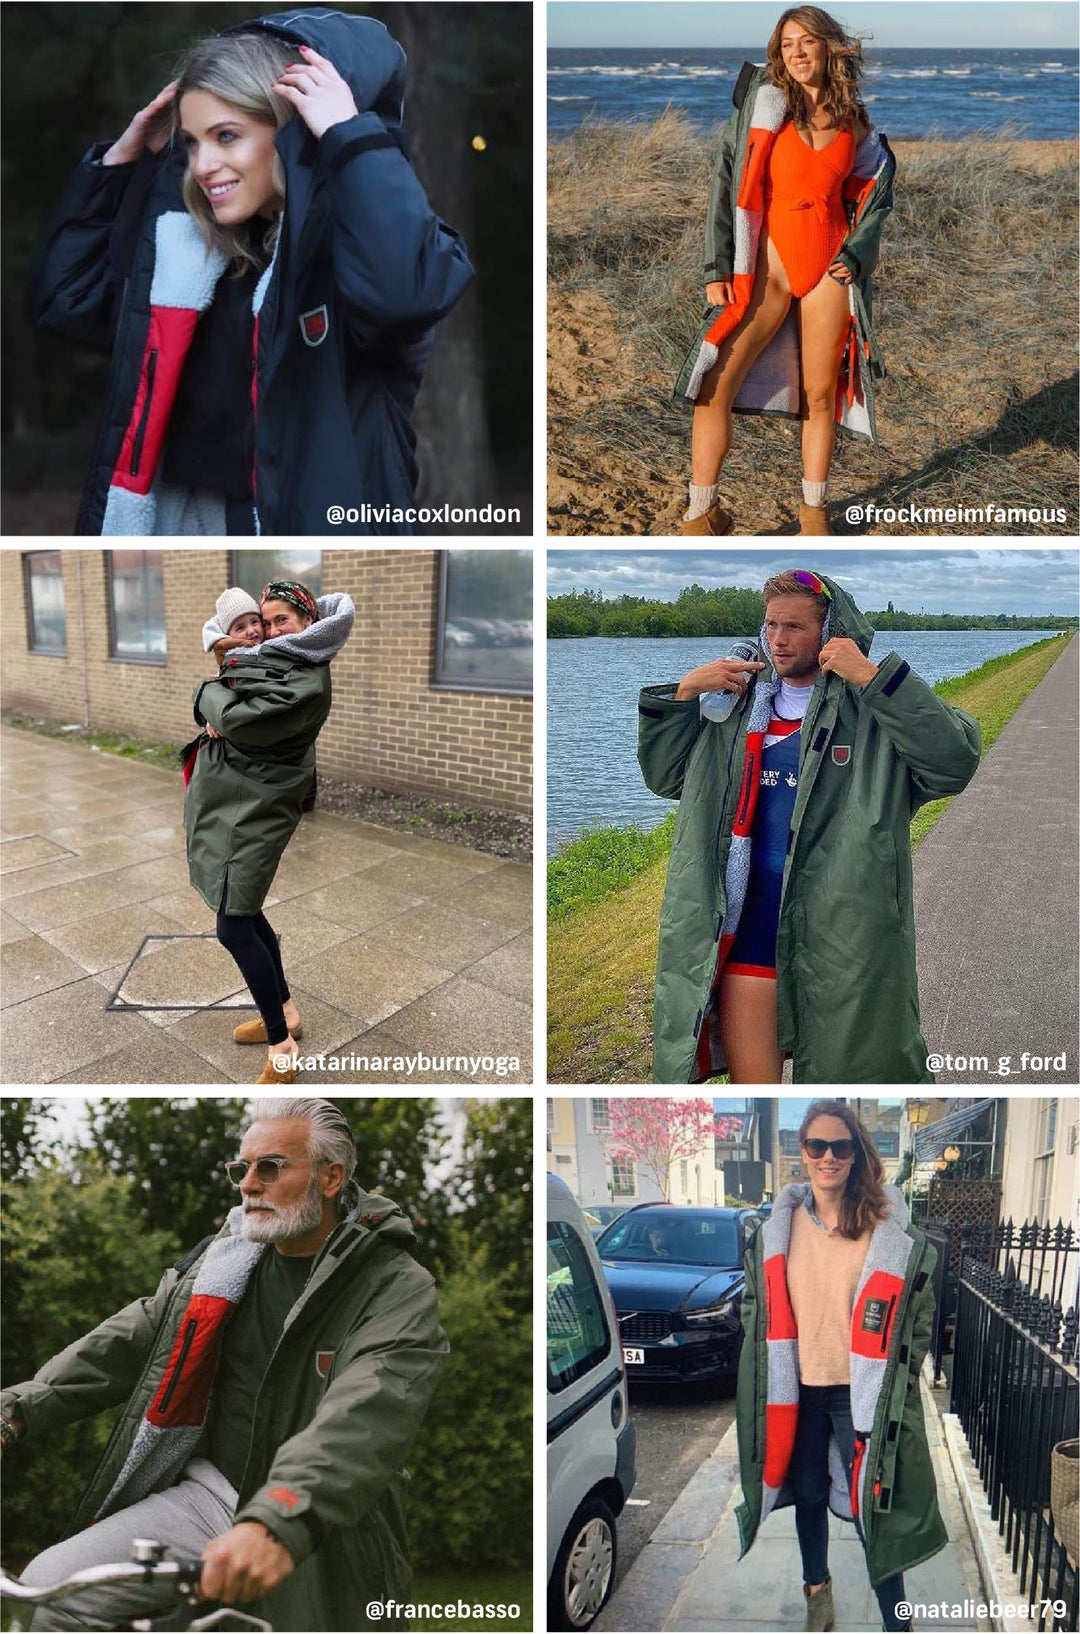 This image has 6 different images about the uses of The Beaufort Robe by D-Robe. You can use it as a dry robe after a swim, as a raincoat during Spring showers, as a Parka during the colder months, or style it as an oversize outdoor robe. The uses of The Beaufort Robe are immense. 